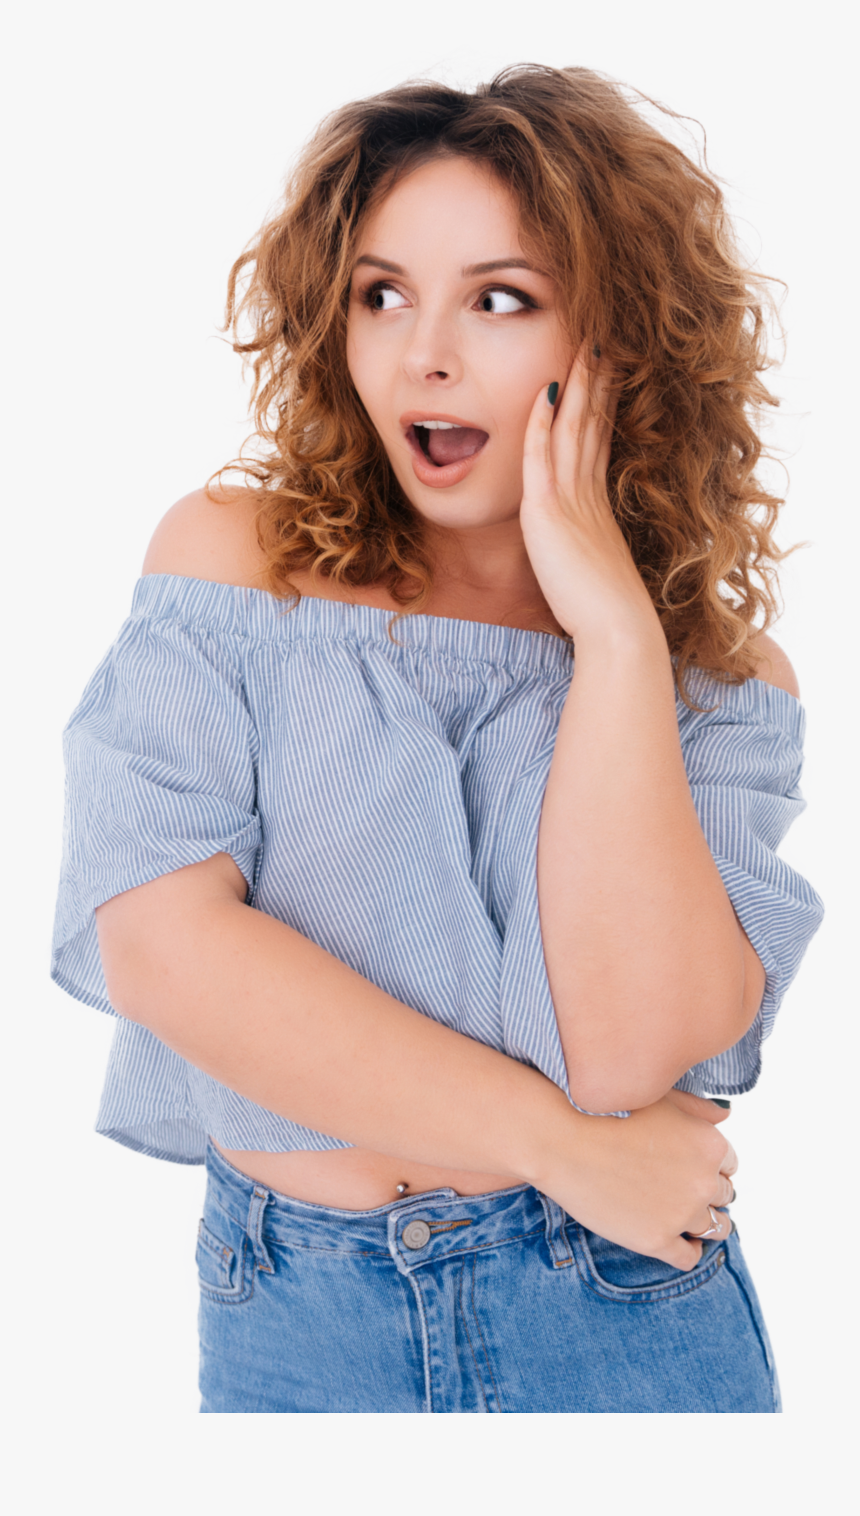 Woman Open Mouth Png, Transparent Png, Free Download